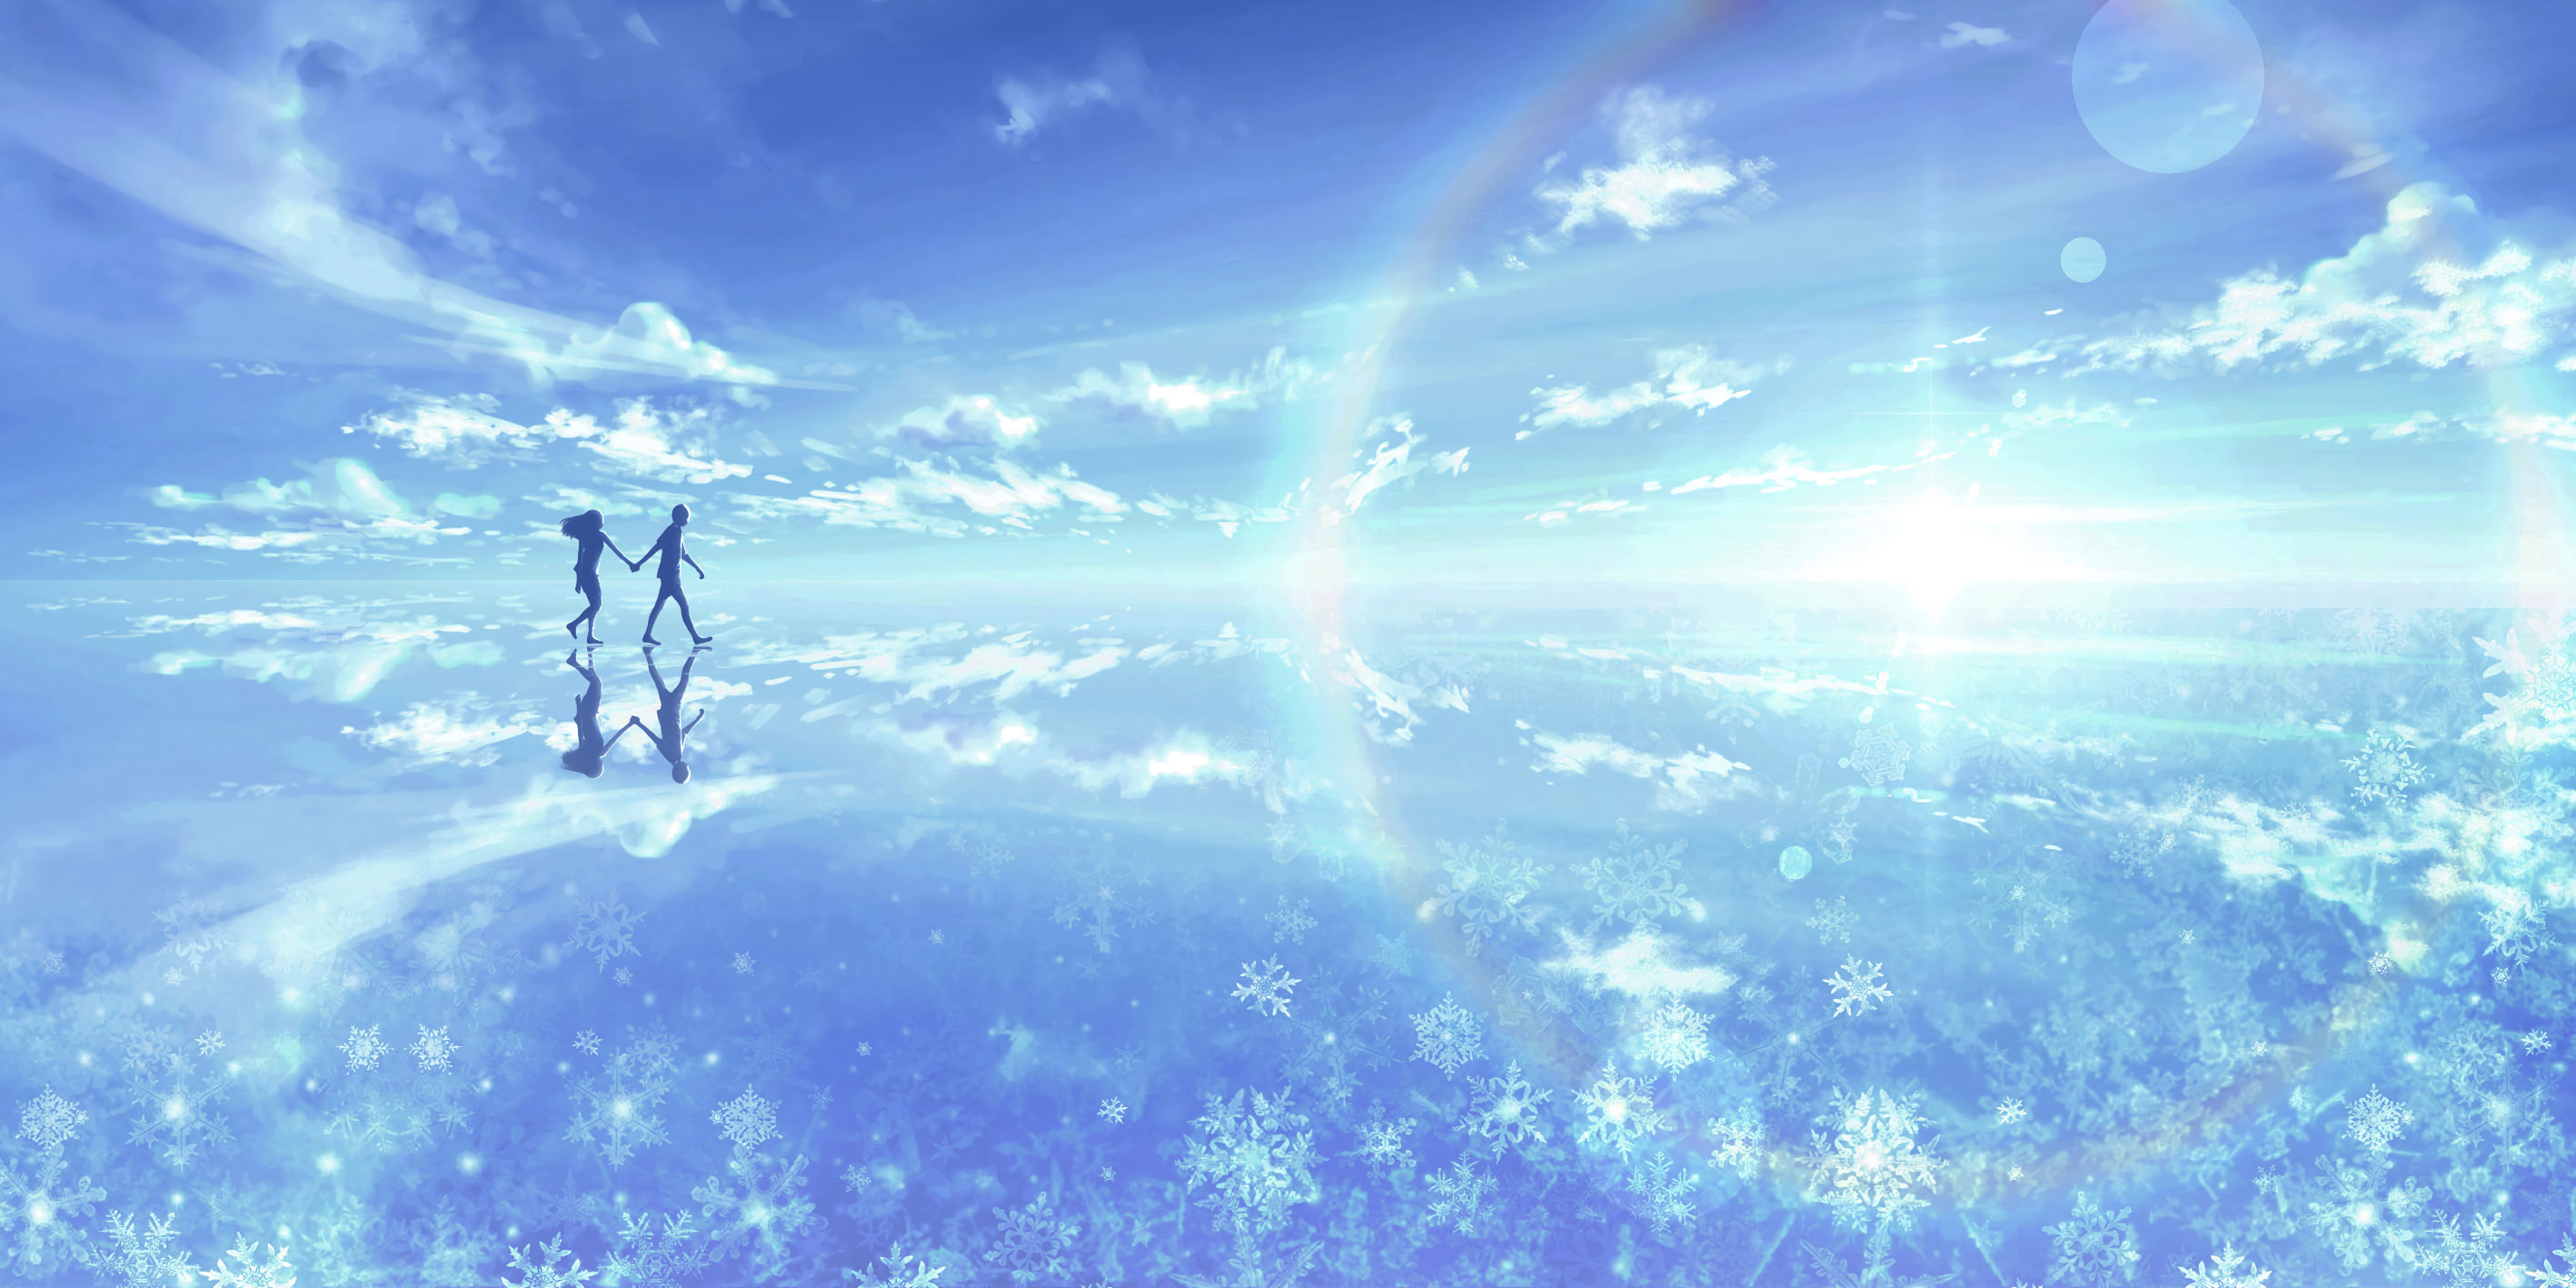 Anime Anime Girls Holding Hands Snowflakes Sky Reflection Silhouette Clouds Walking 2835x1417